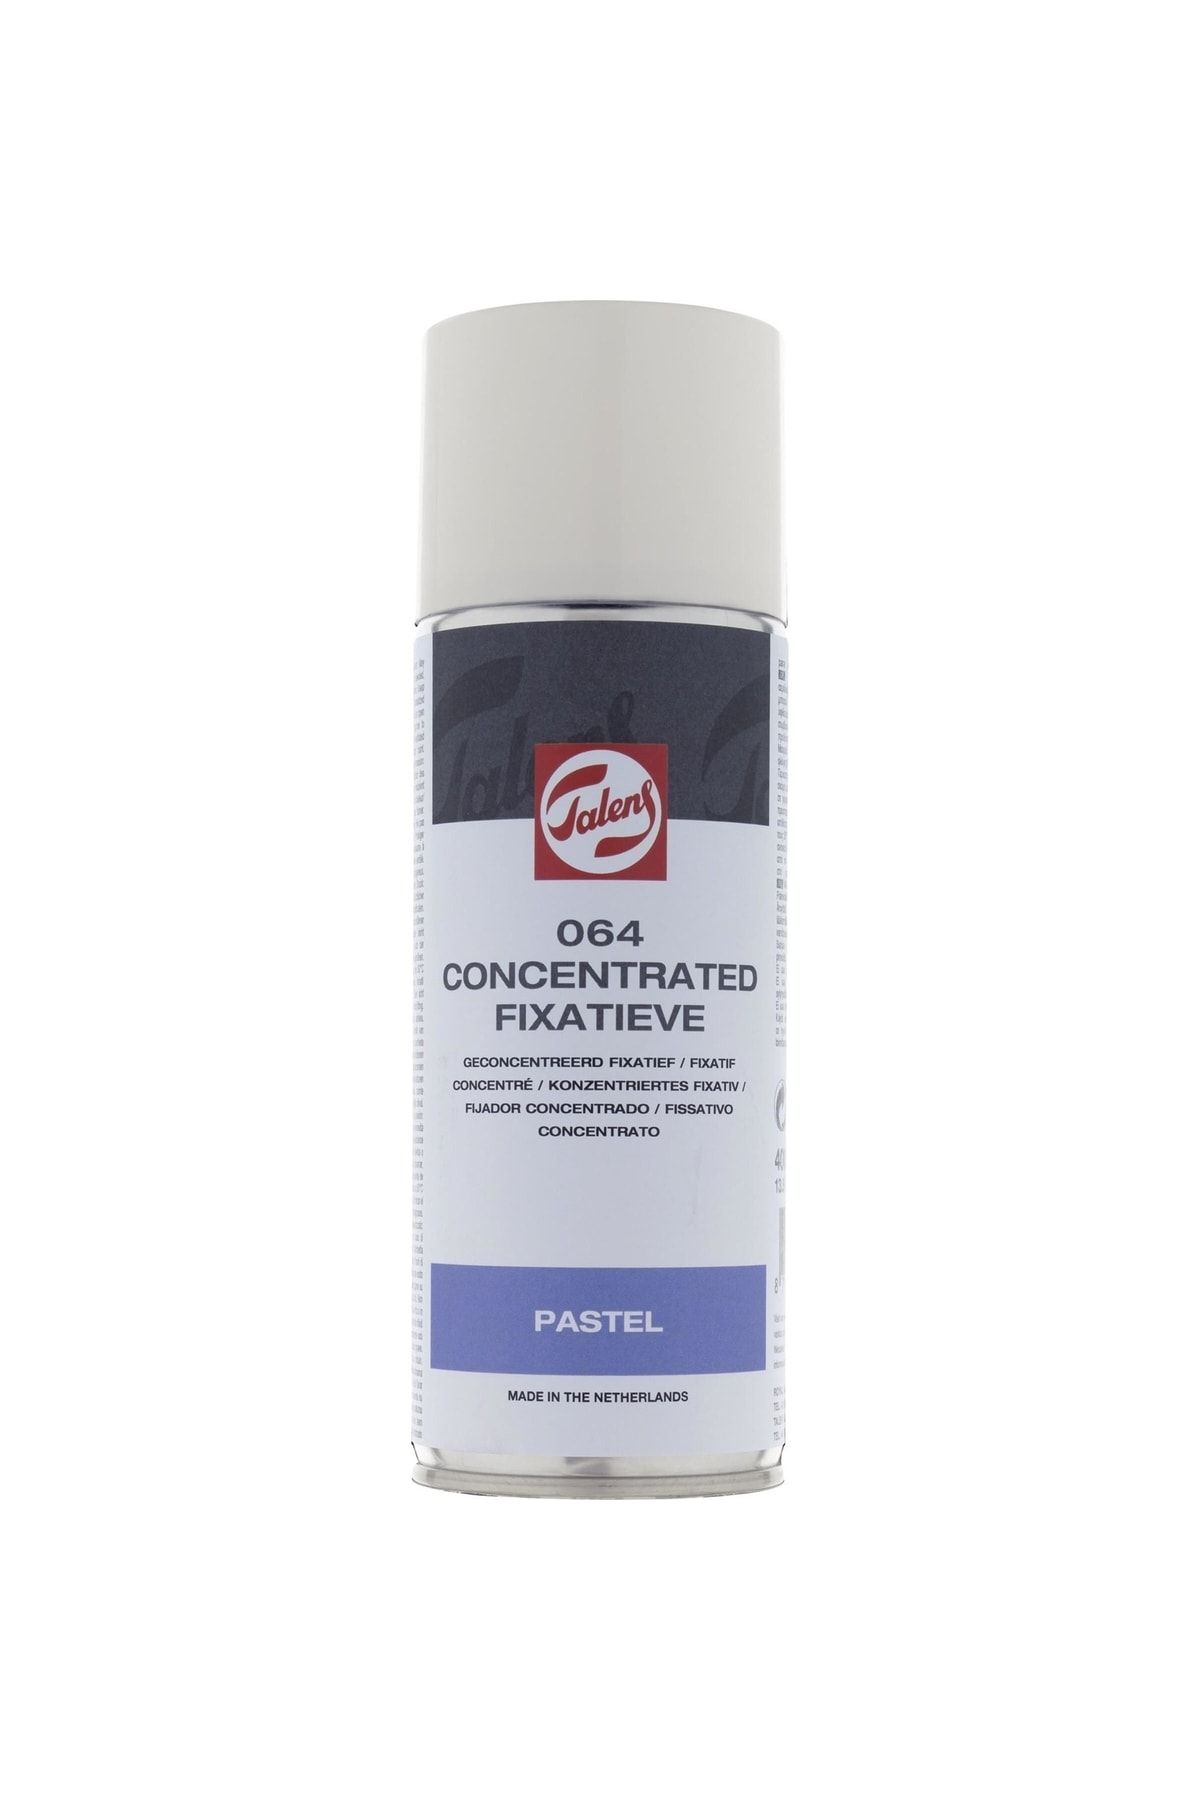 Talens Concentrated Fixative Sprey 064